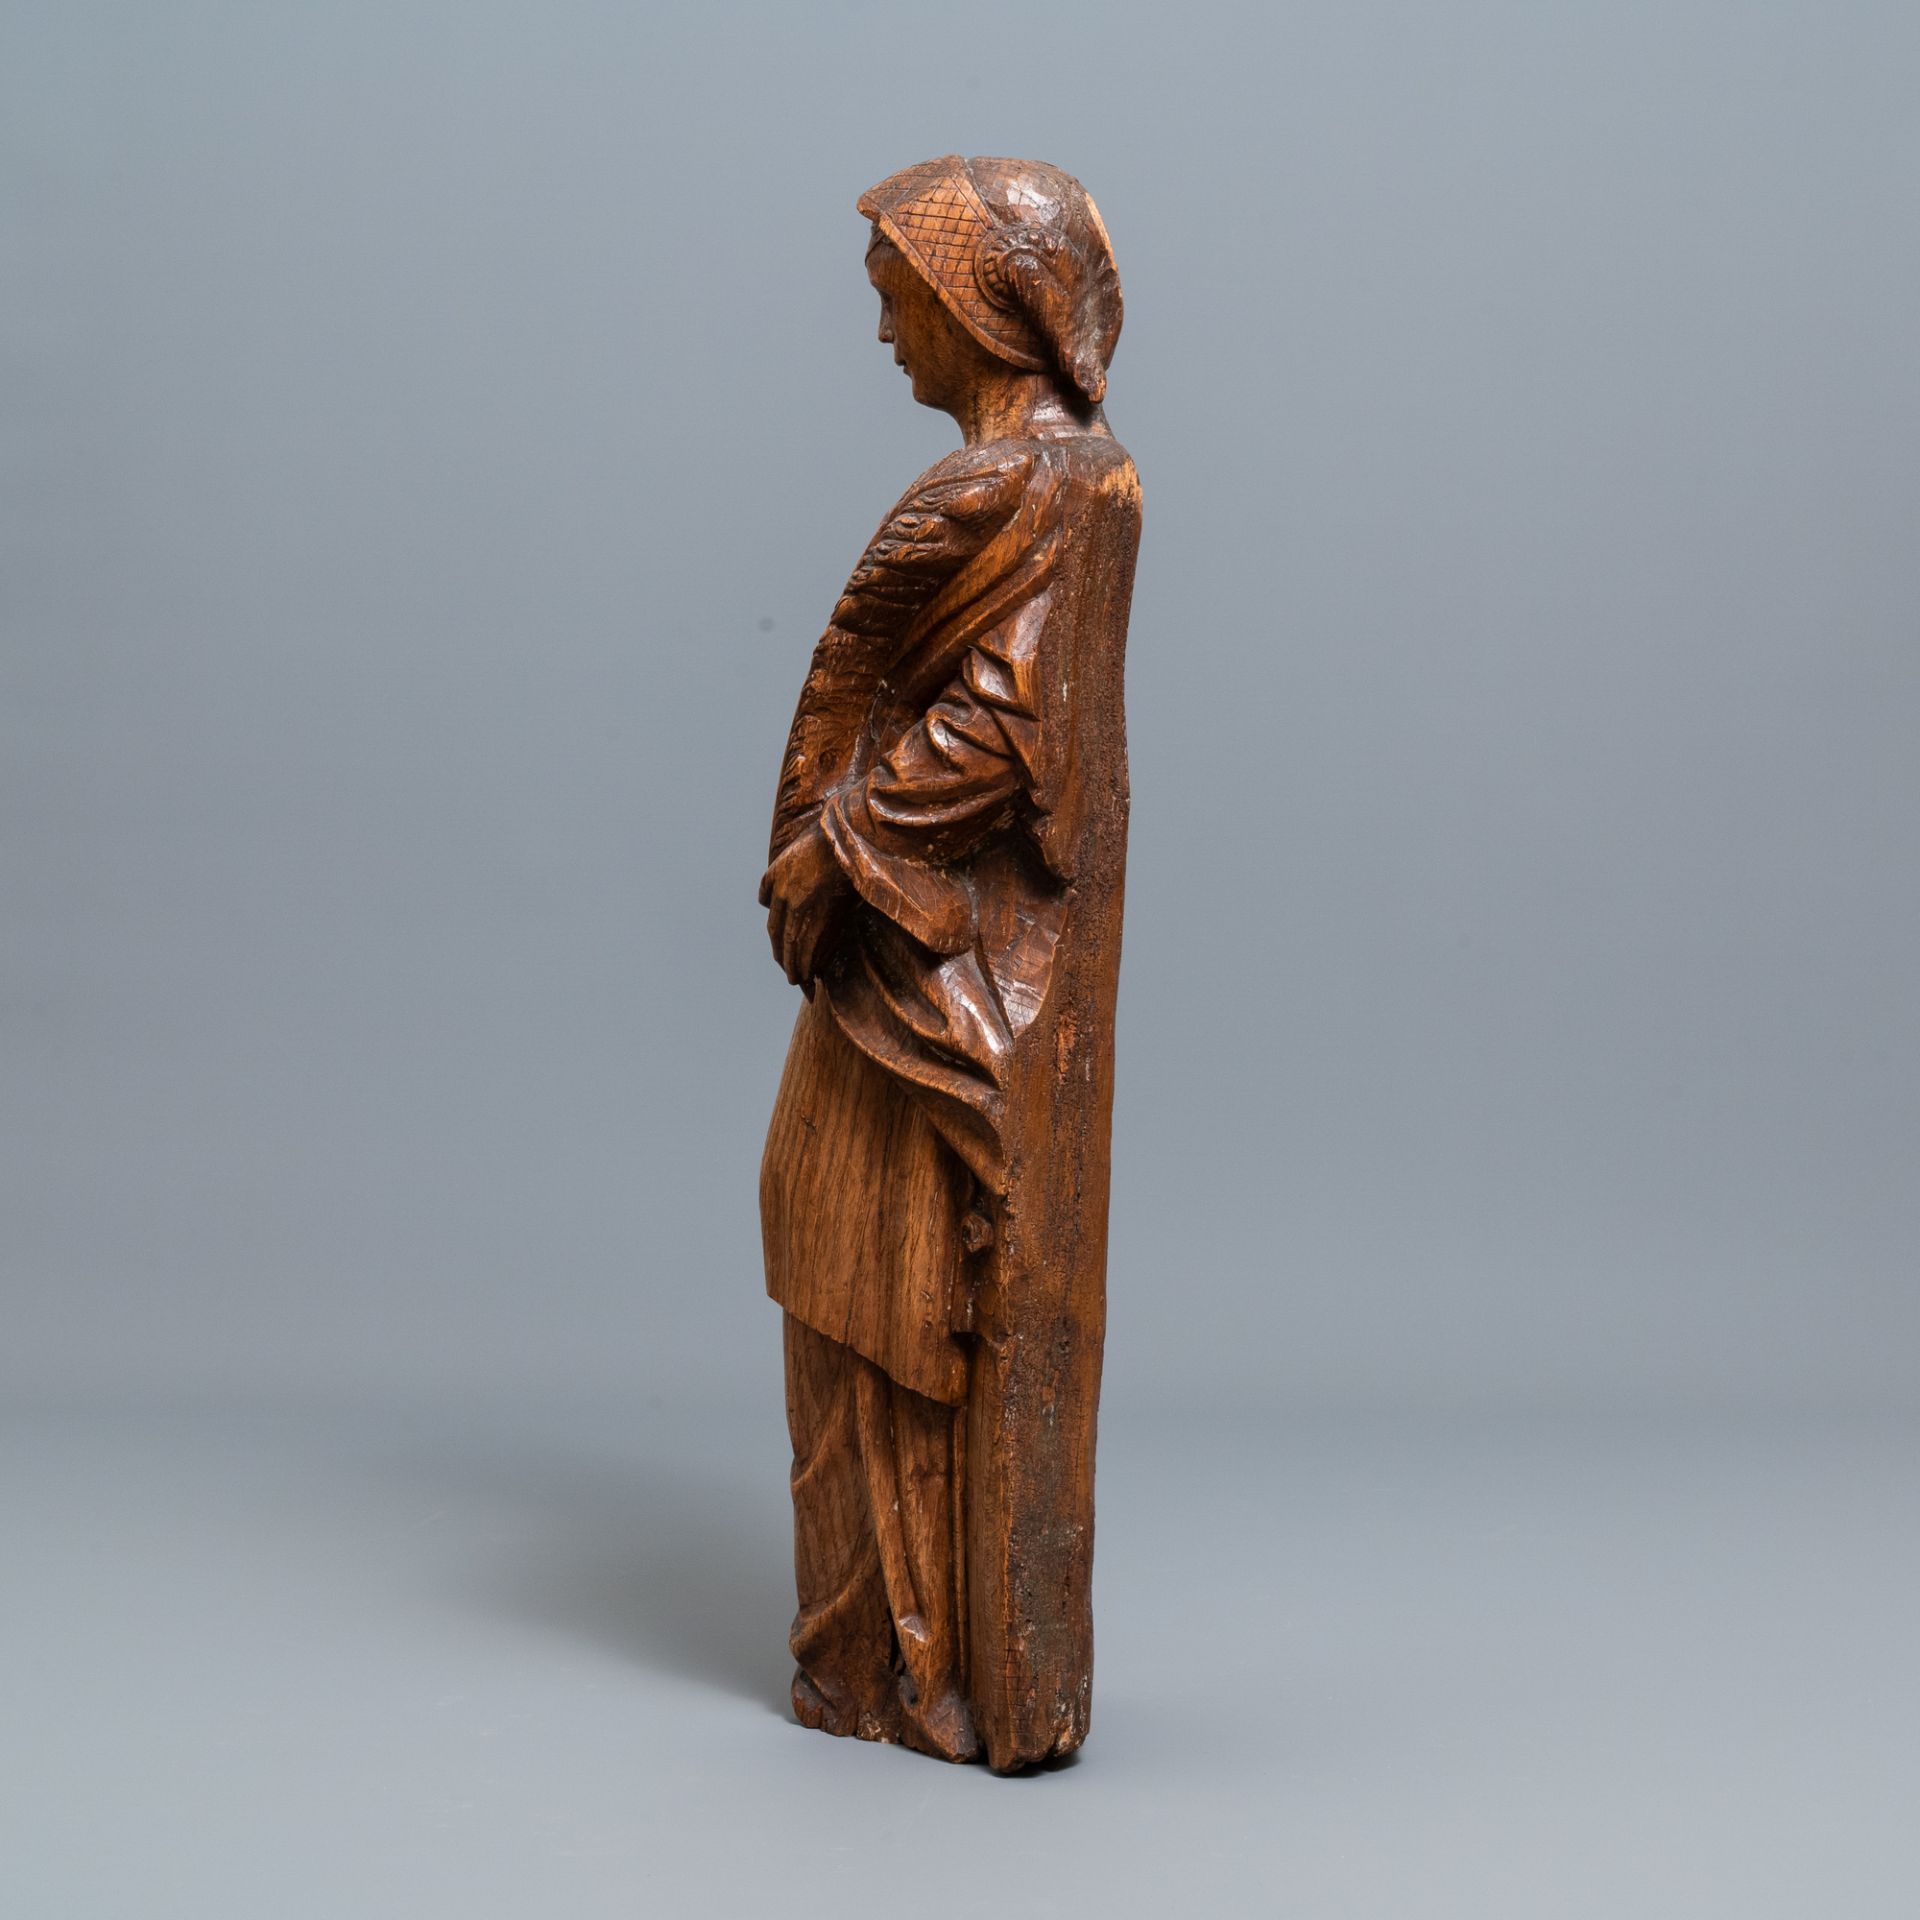 A large wooden figure of Saint Barbara, Germany, 16th C. - Image 3 of 7